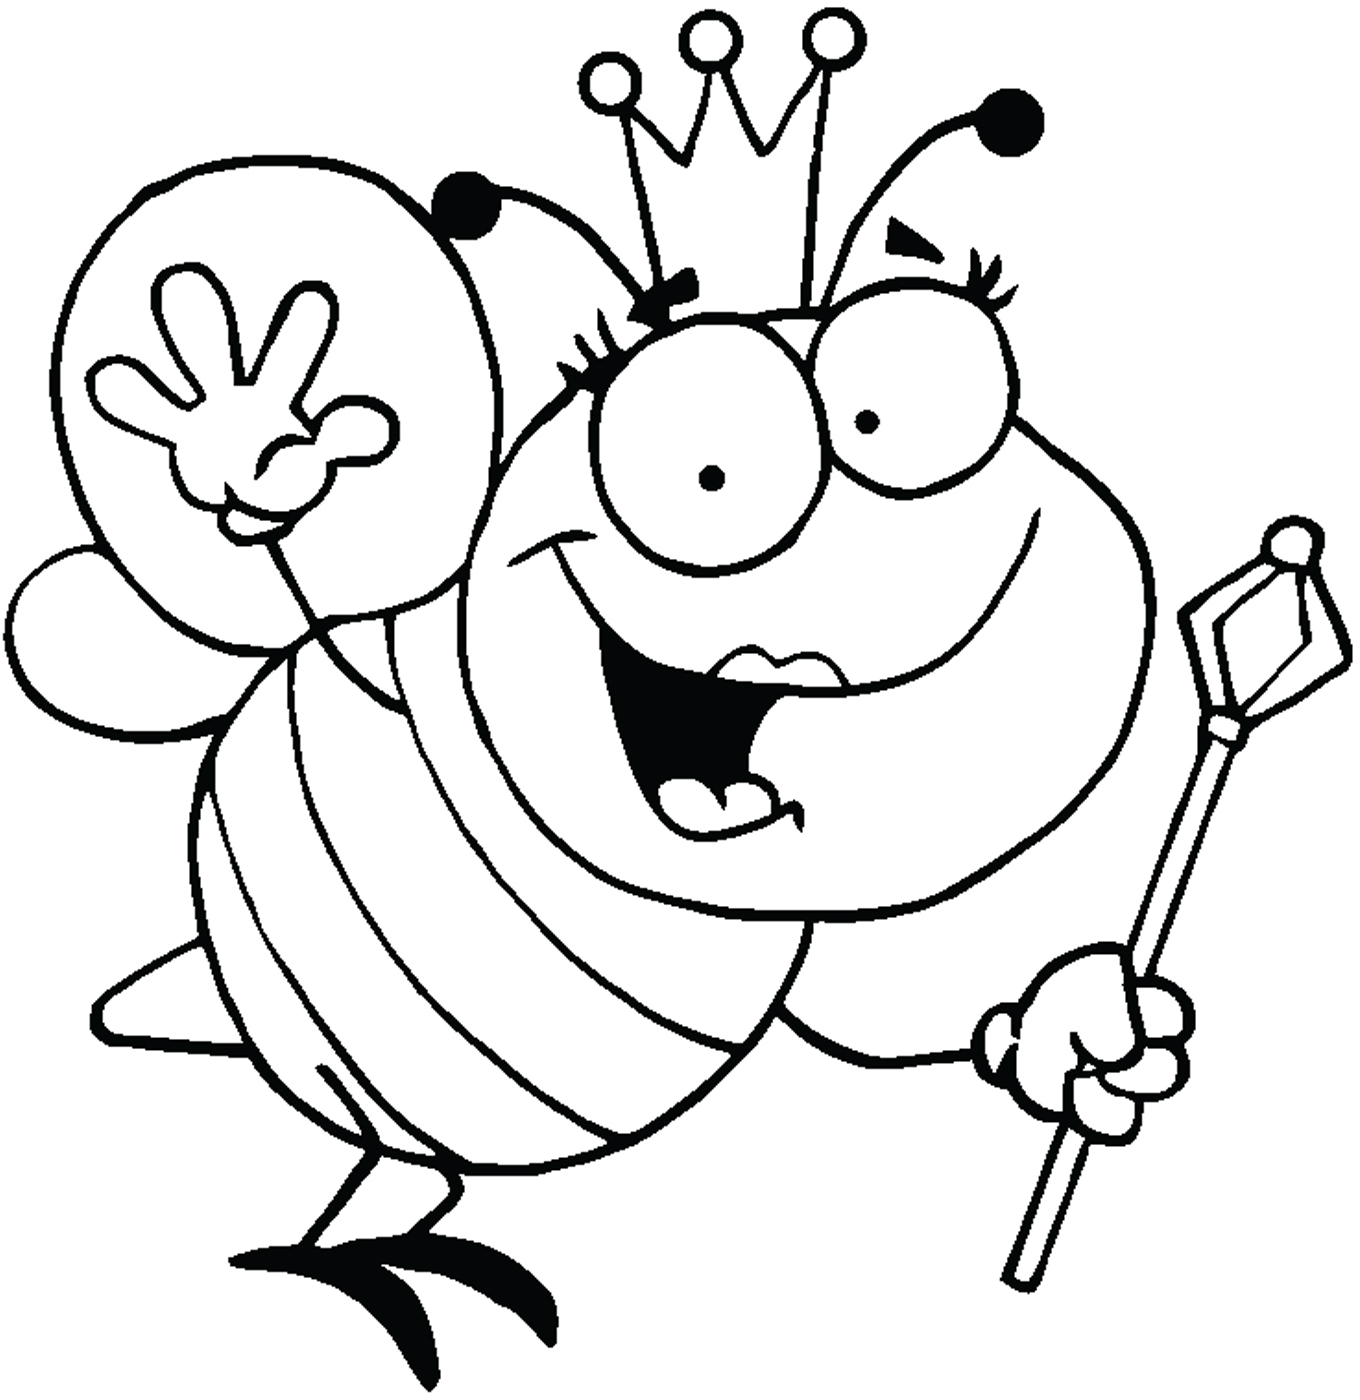 Bee Hive Picture - Clipart library